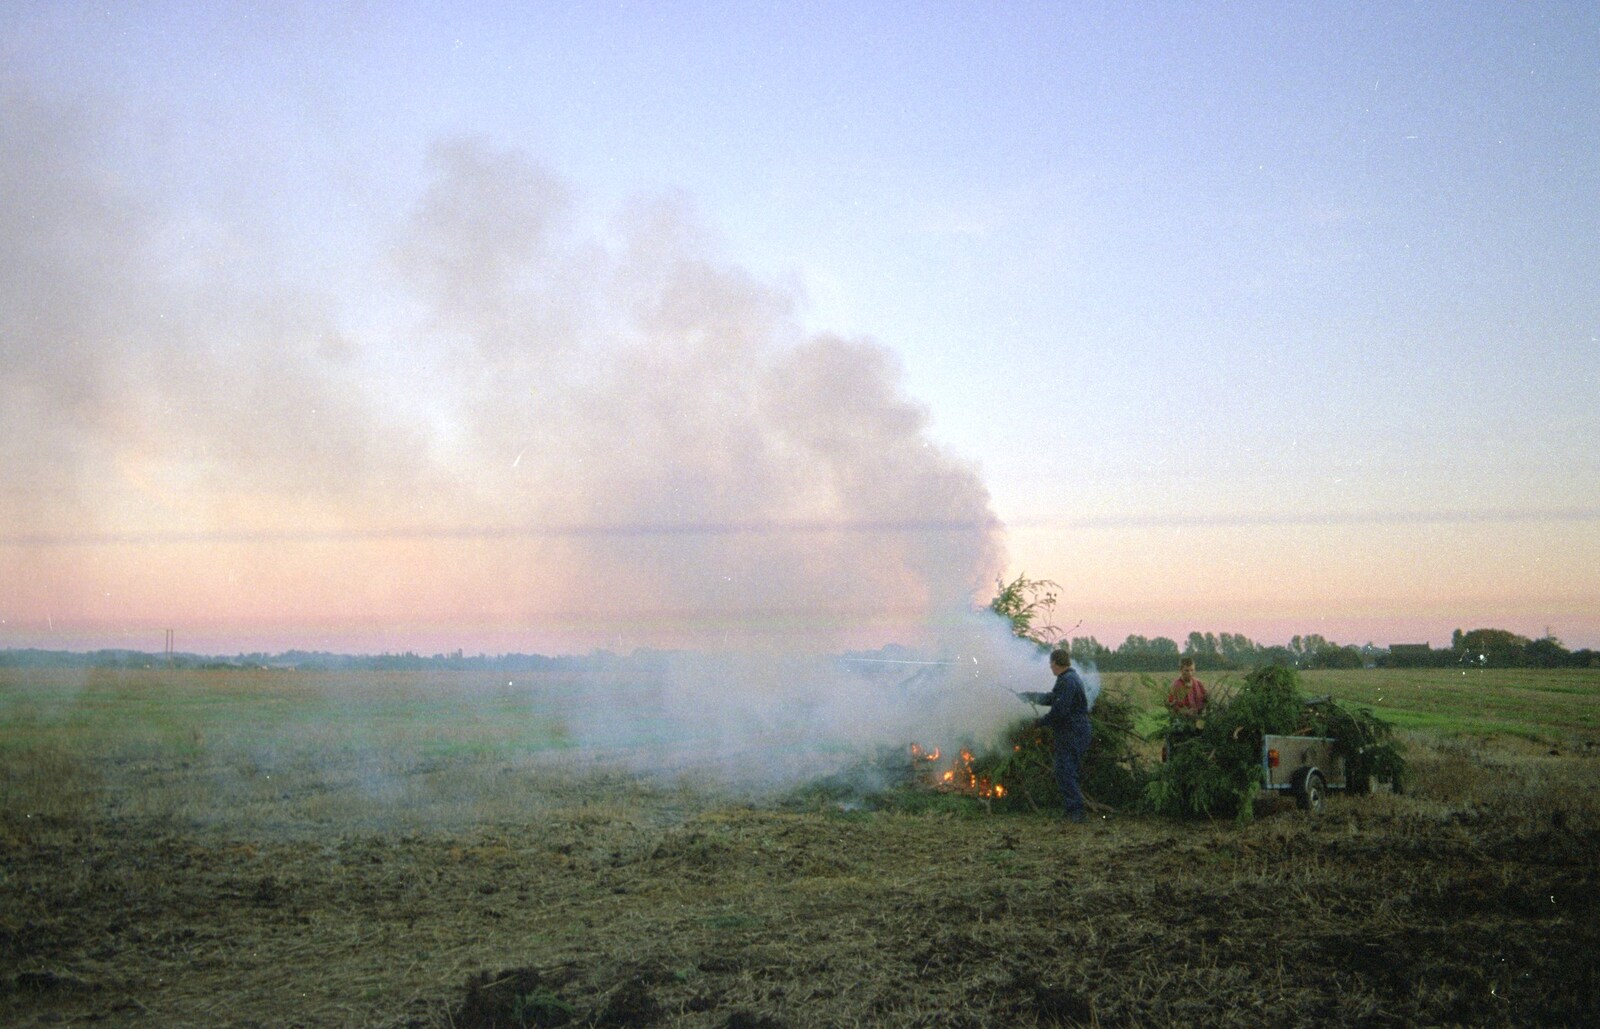 Danny and Charlie have a burn up on the field from Cider Making With Geoff and Brenda, Stuston, Suffolk - 10th September 1998